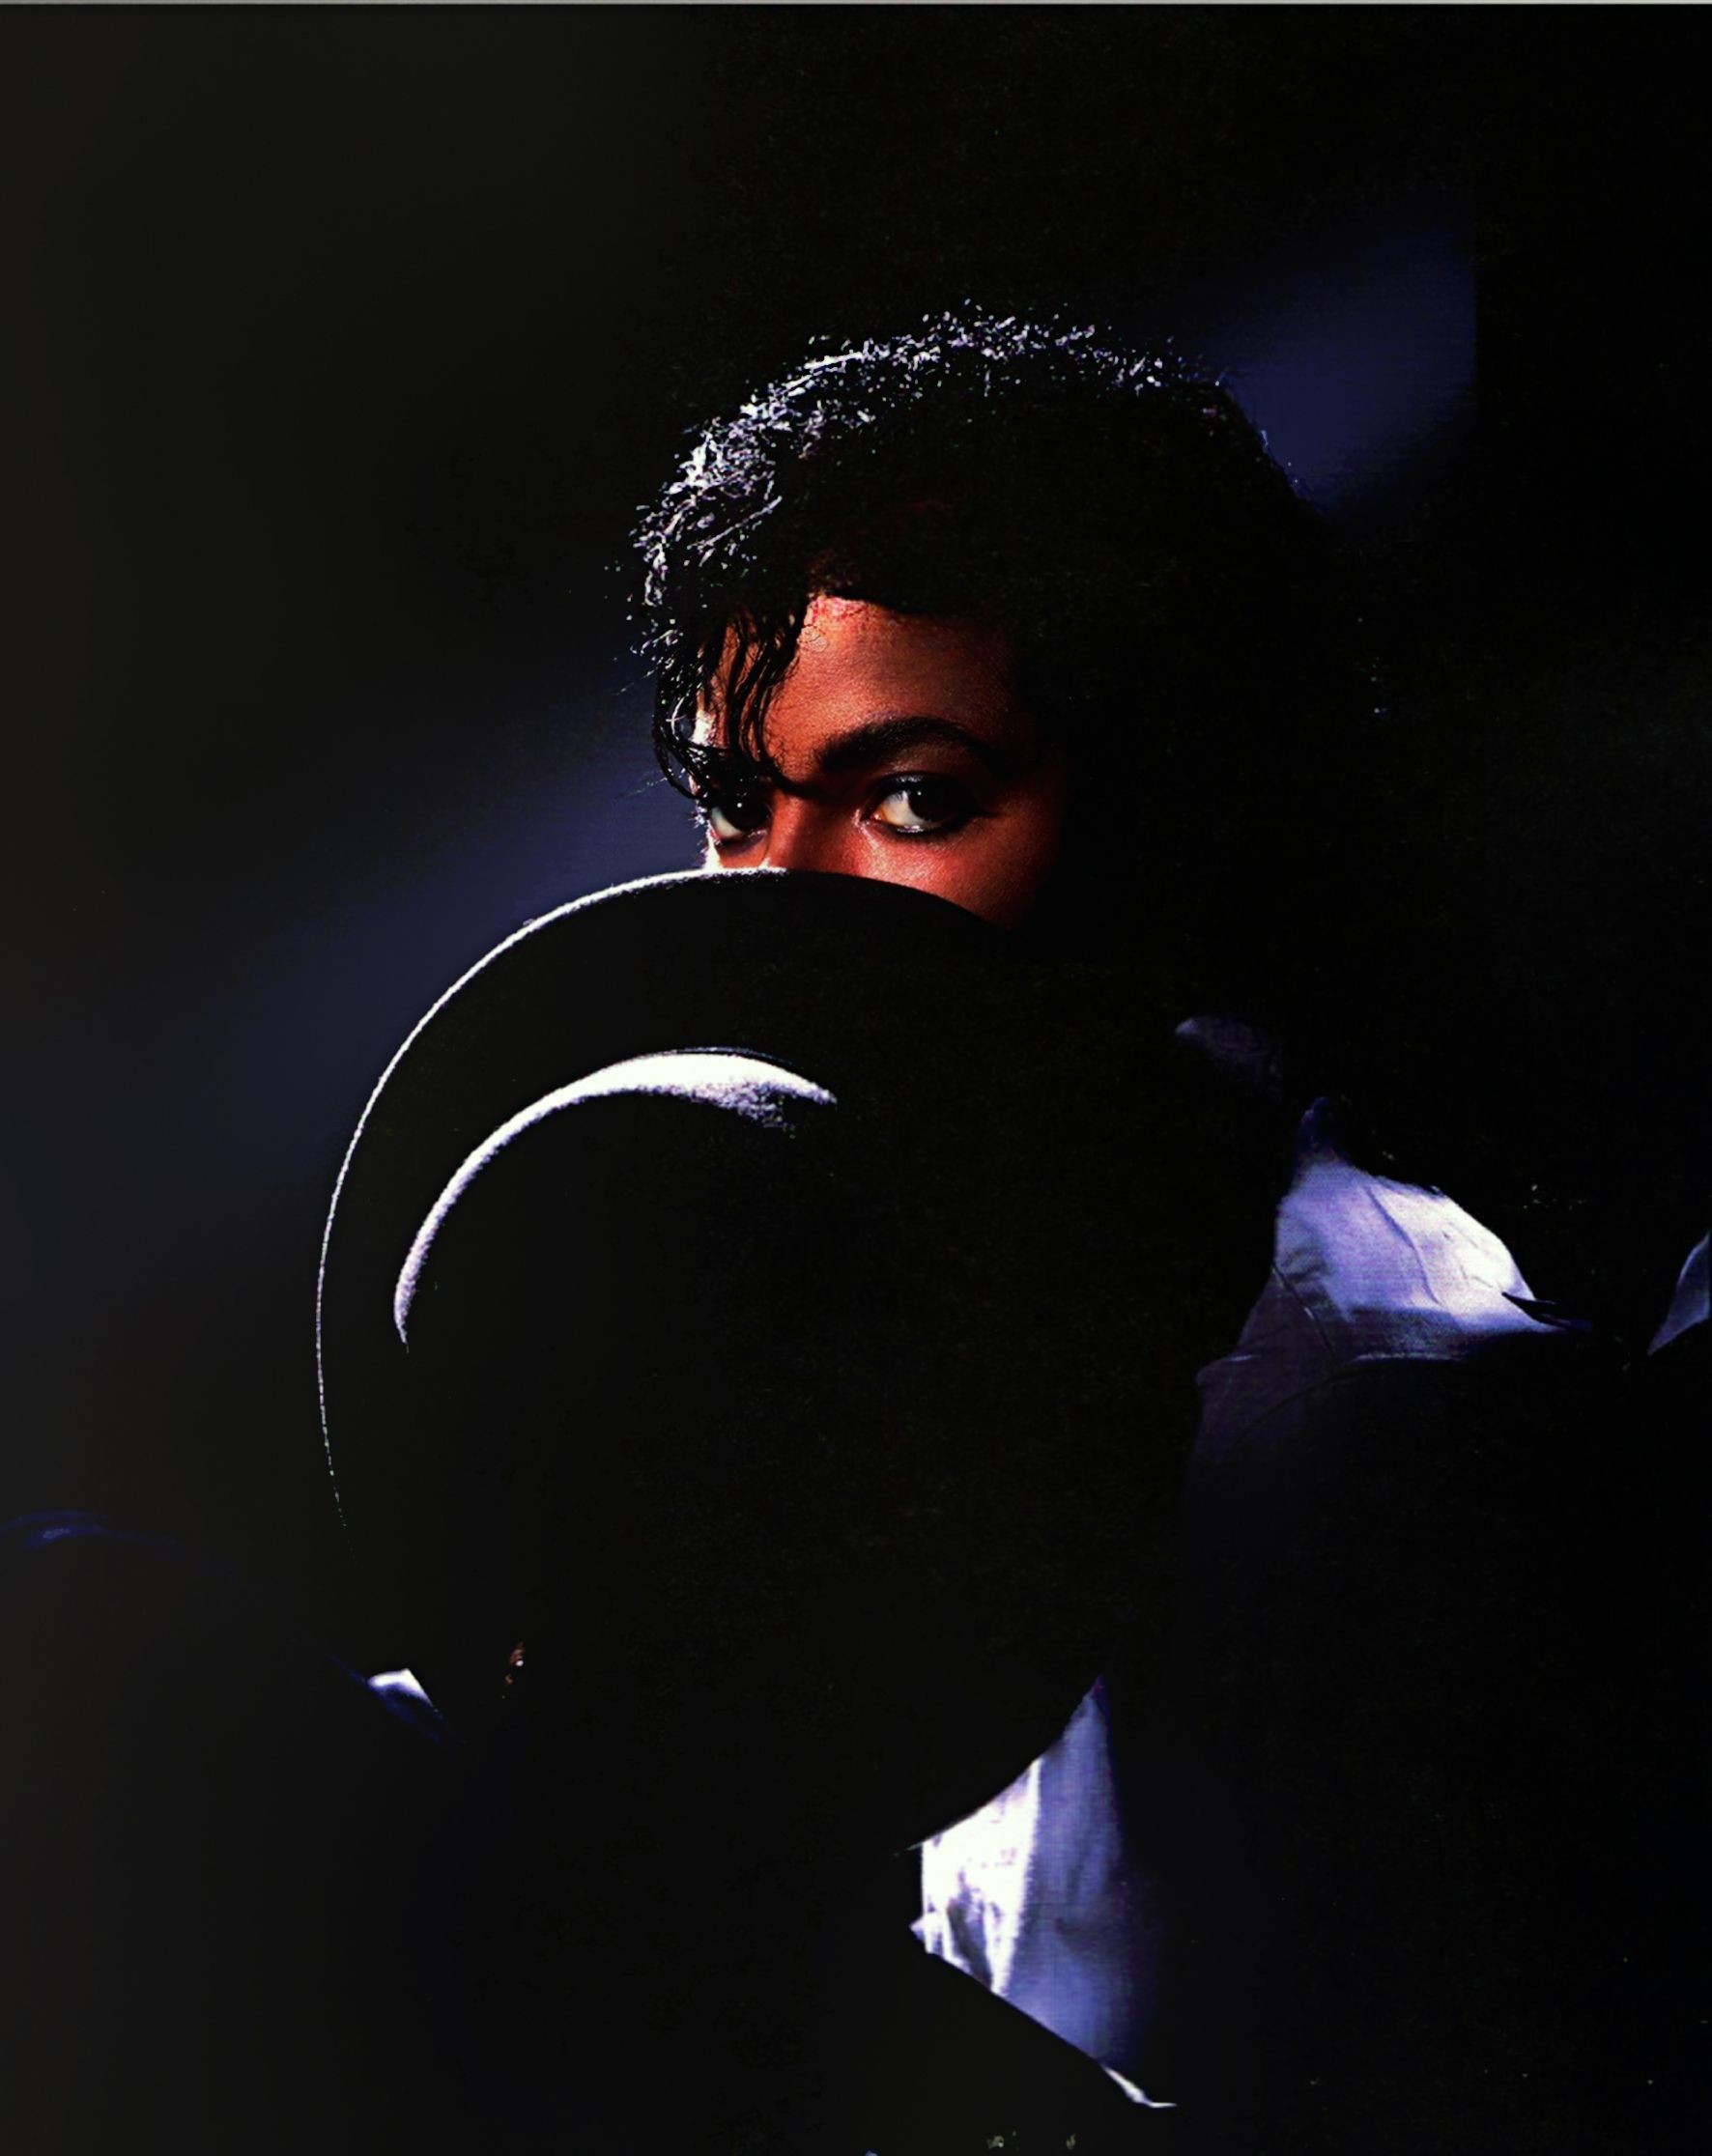 michael jackson images wallpapers,light,darkness,performance,photography,night